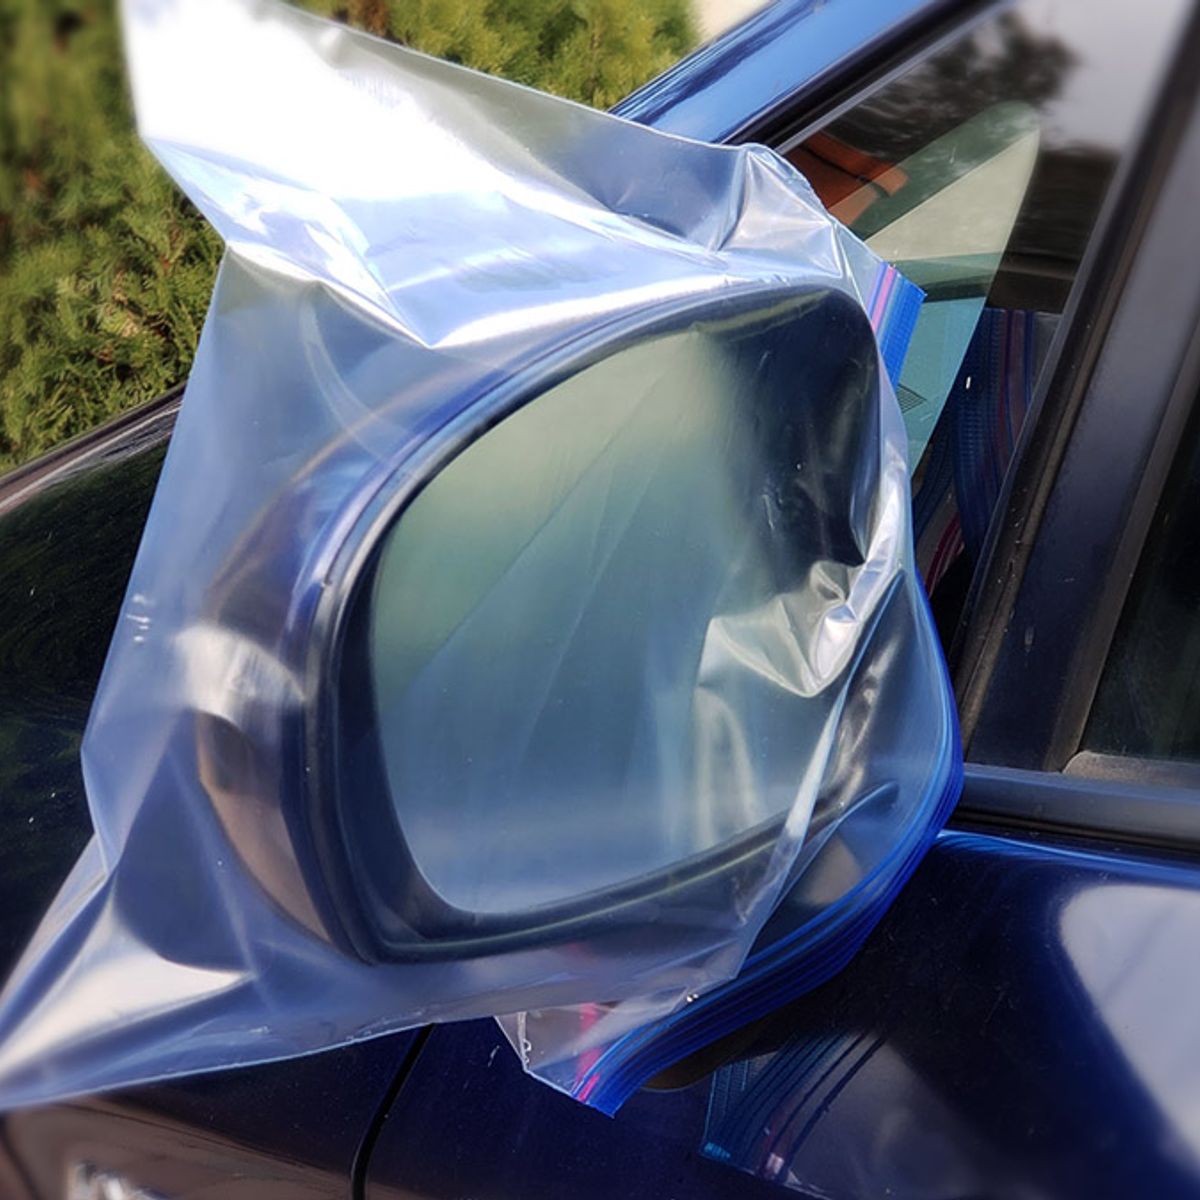 Does Putting a Ziplock Bag Over a Car Mirror Have a Legitimate Purpose?